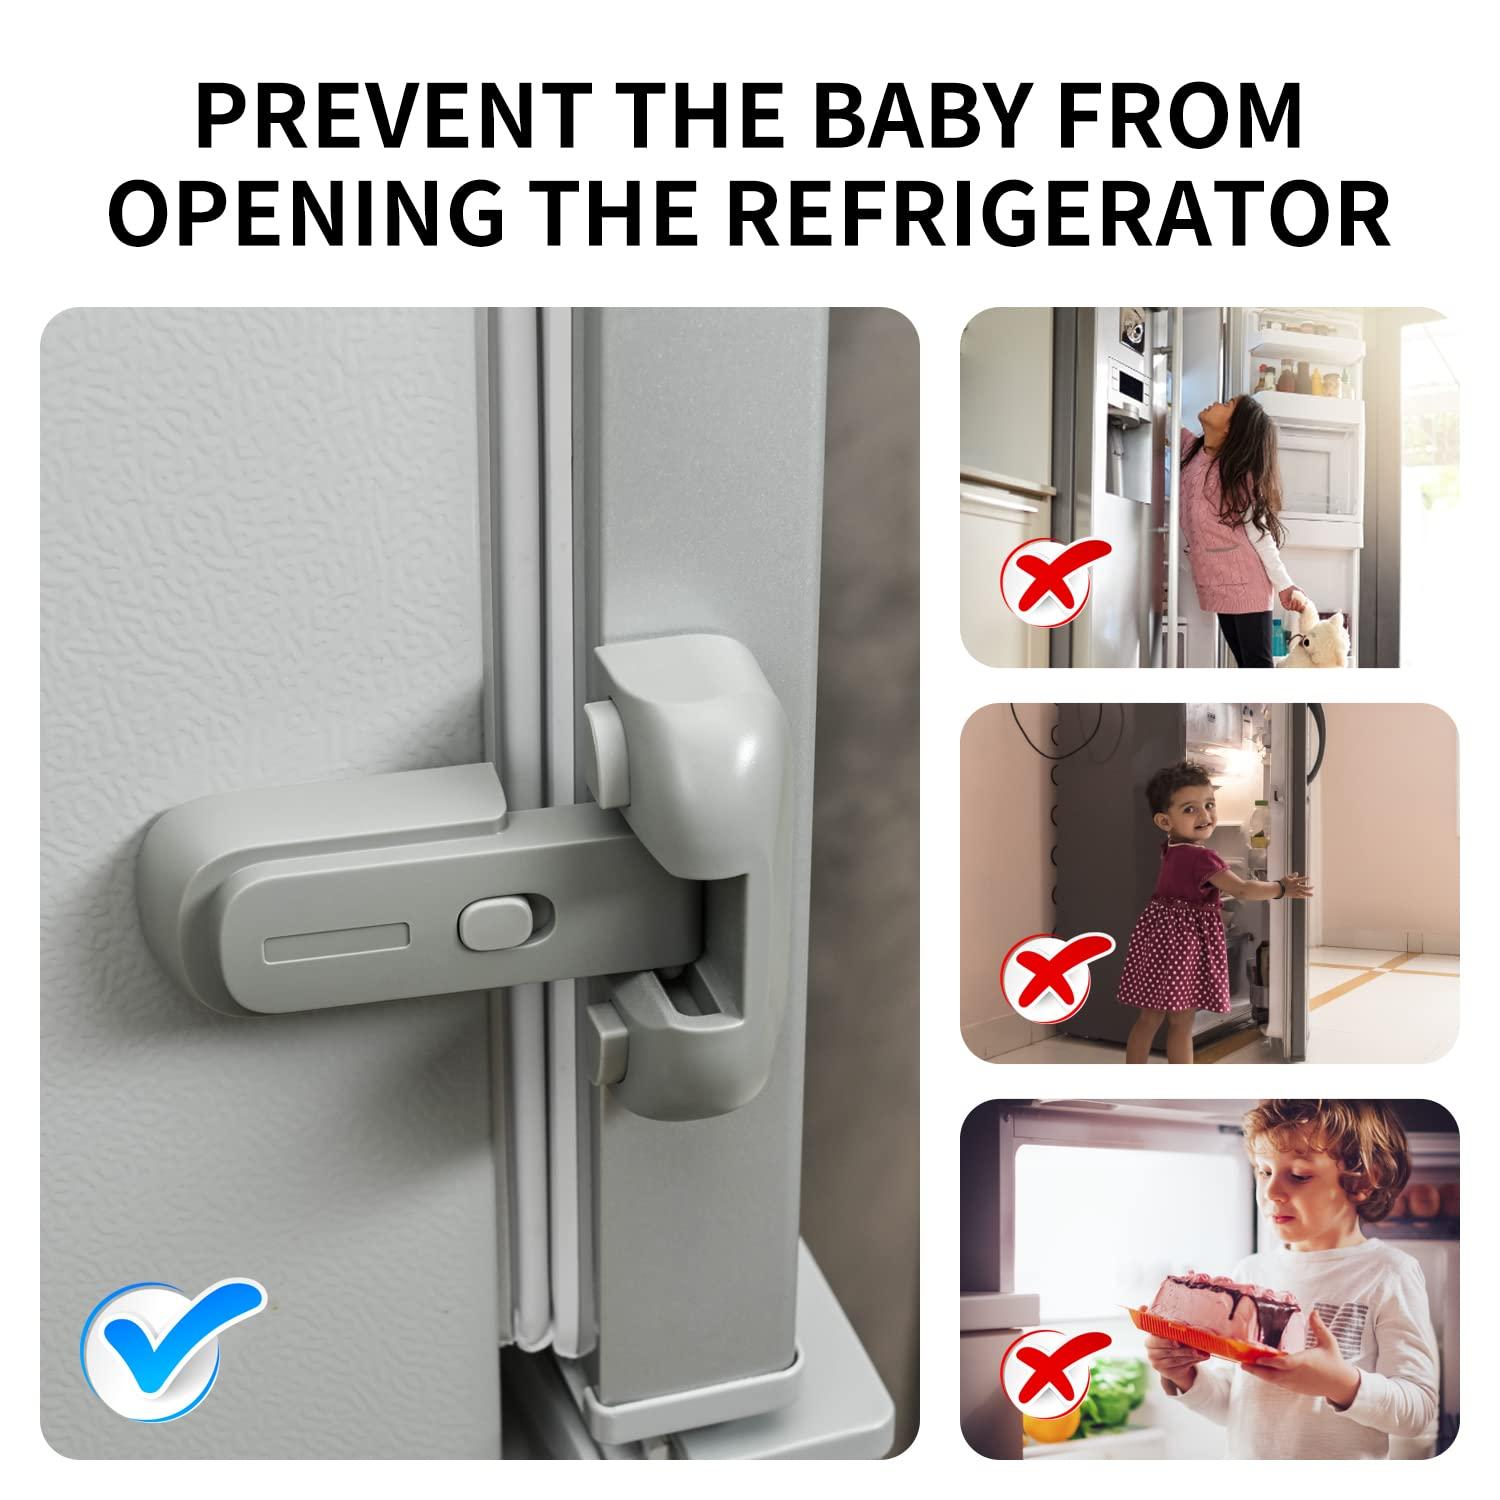 HEOATH Upgrade Home Refrigerator Fridge Freezer Door Lock Latch Catch  Toddler Kids Child Baby Safety Lock Easy to Install and Use 3M VHB Adhesive  no